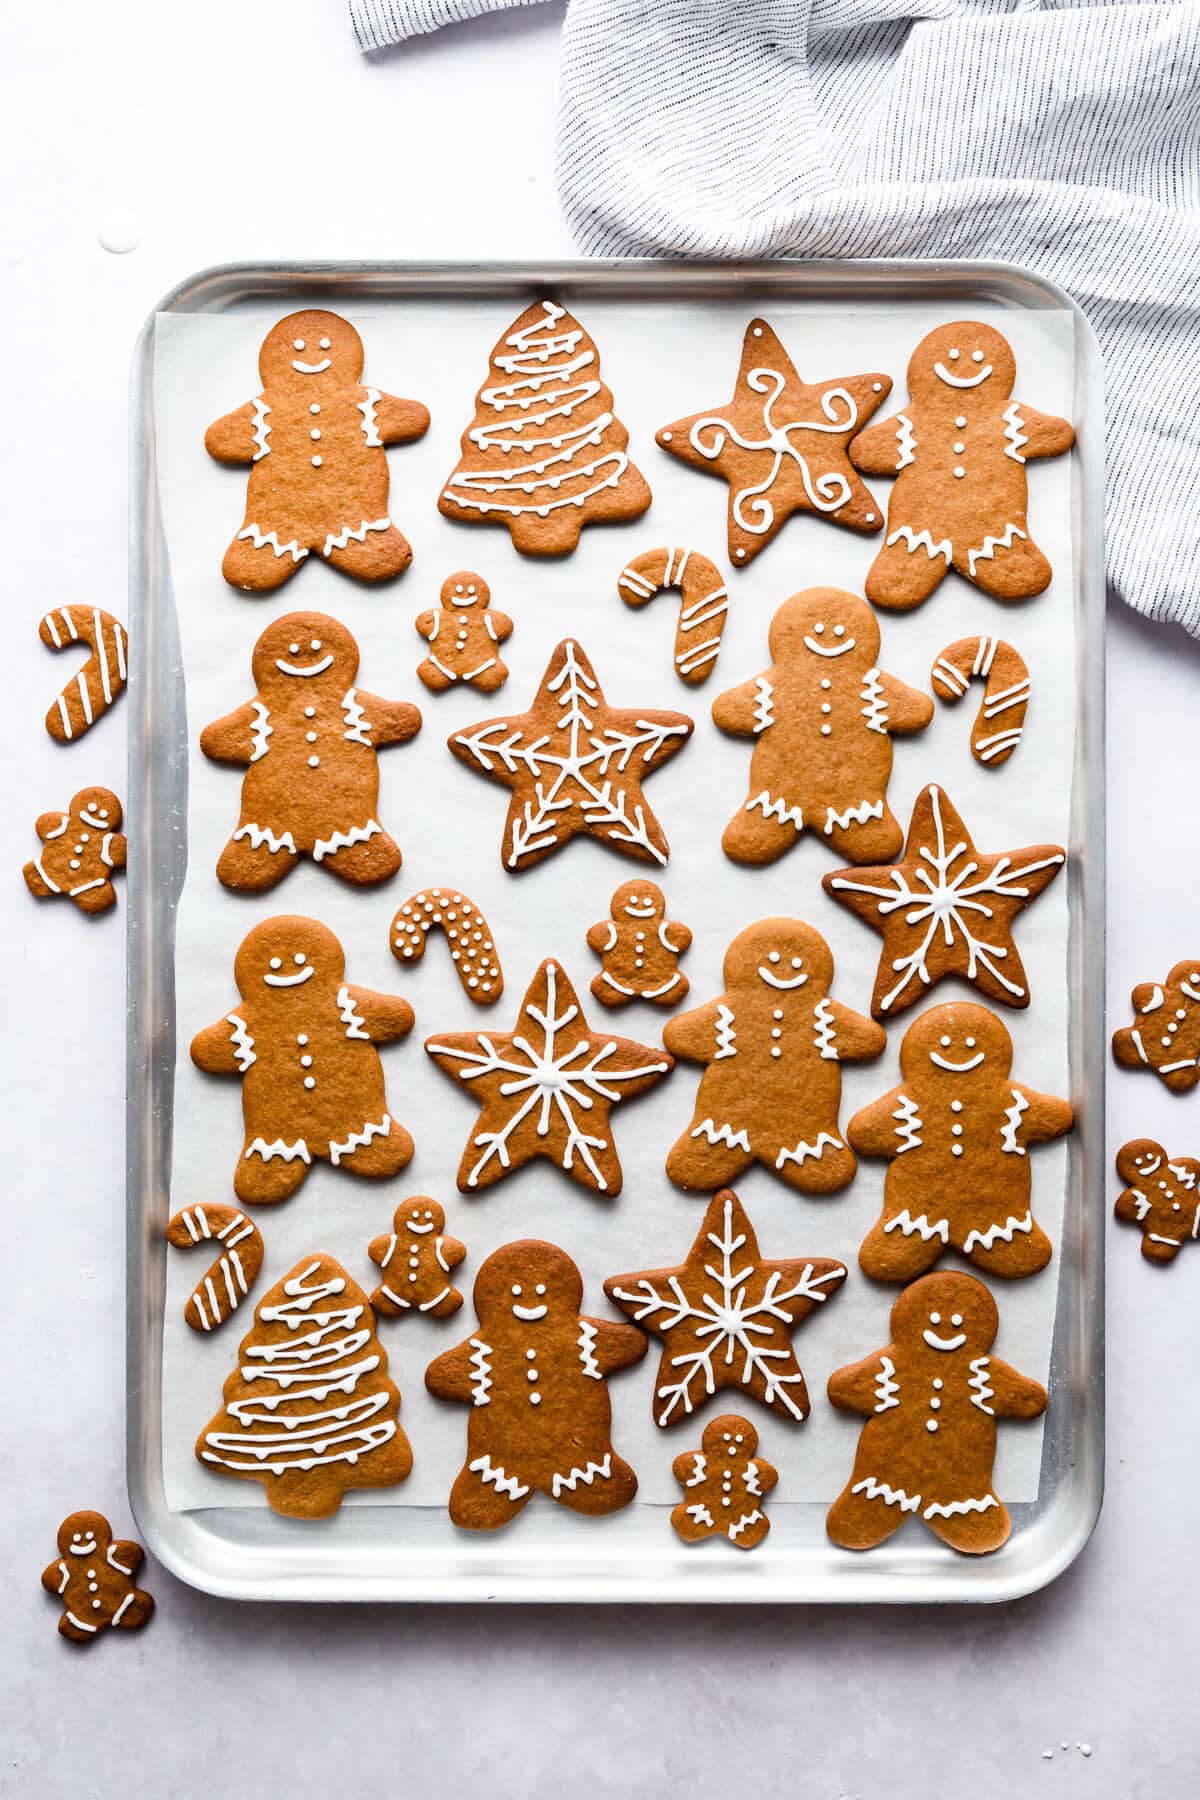 top view of a baking sheet filled with baked and decorated soft gingerbread cookies